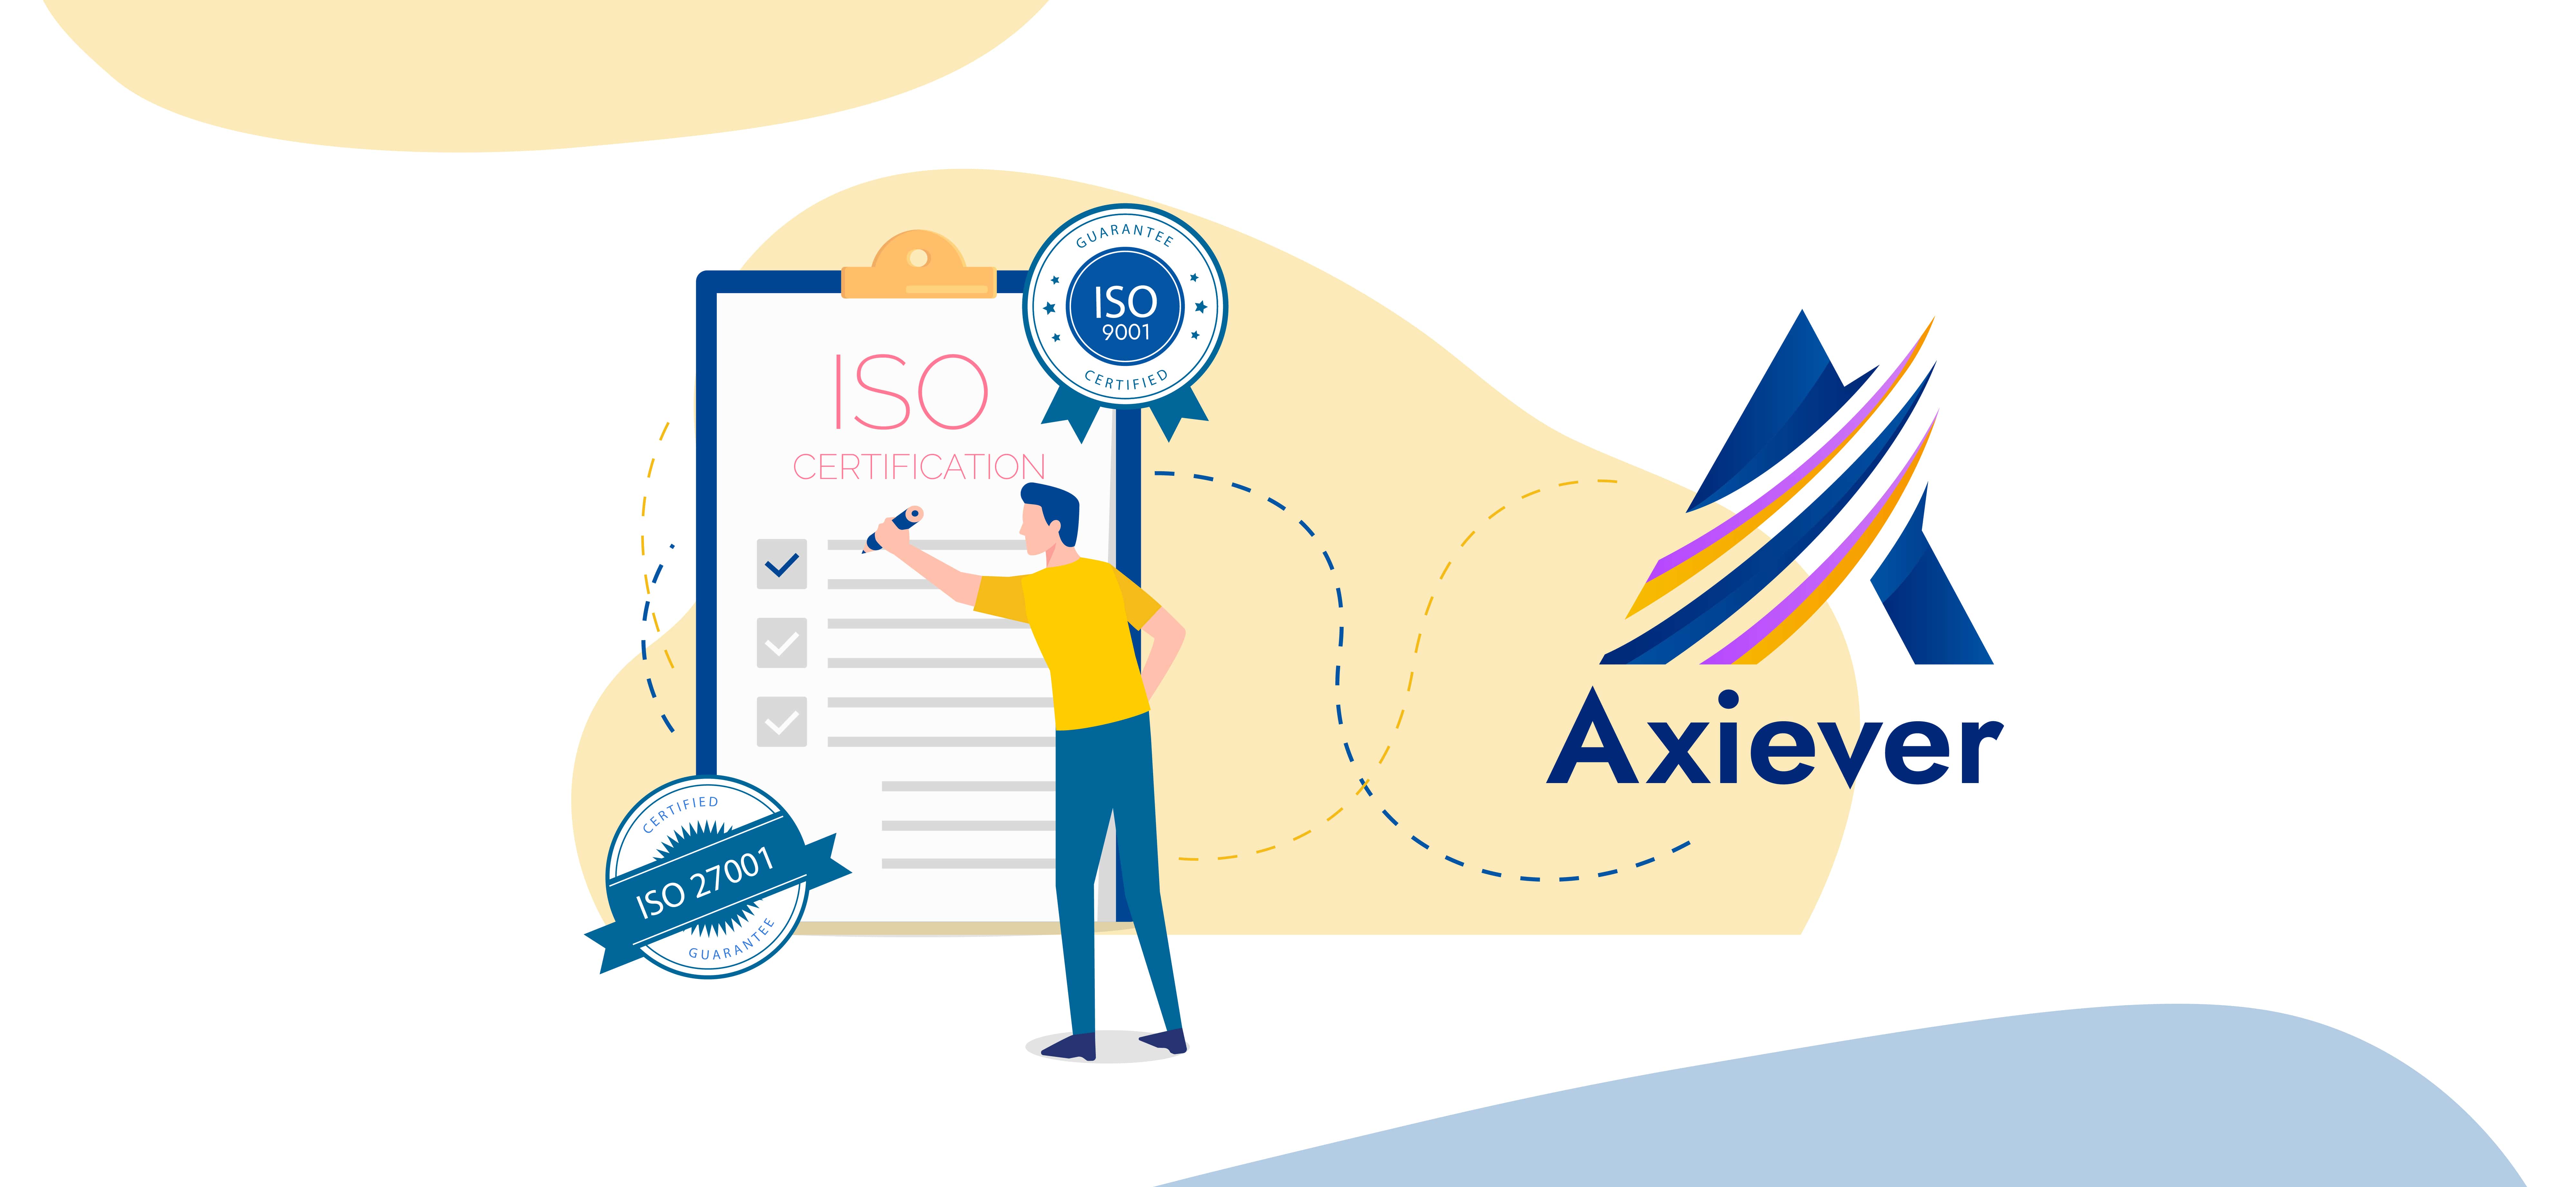 Axiever achieves ISO 9001 and ISO 27001 certification